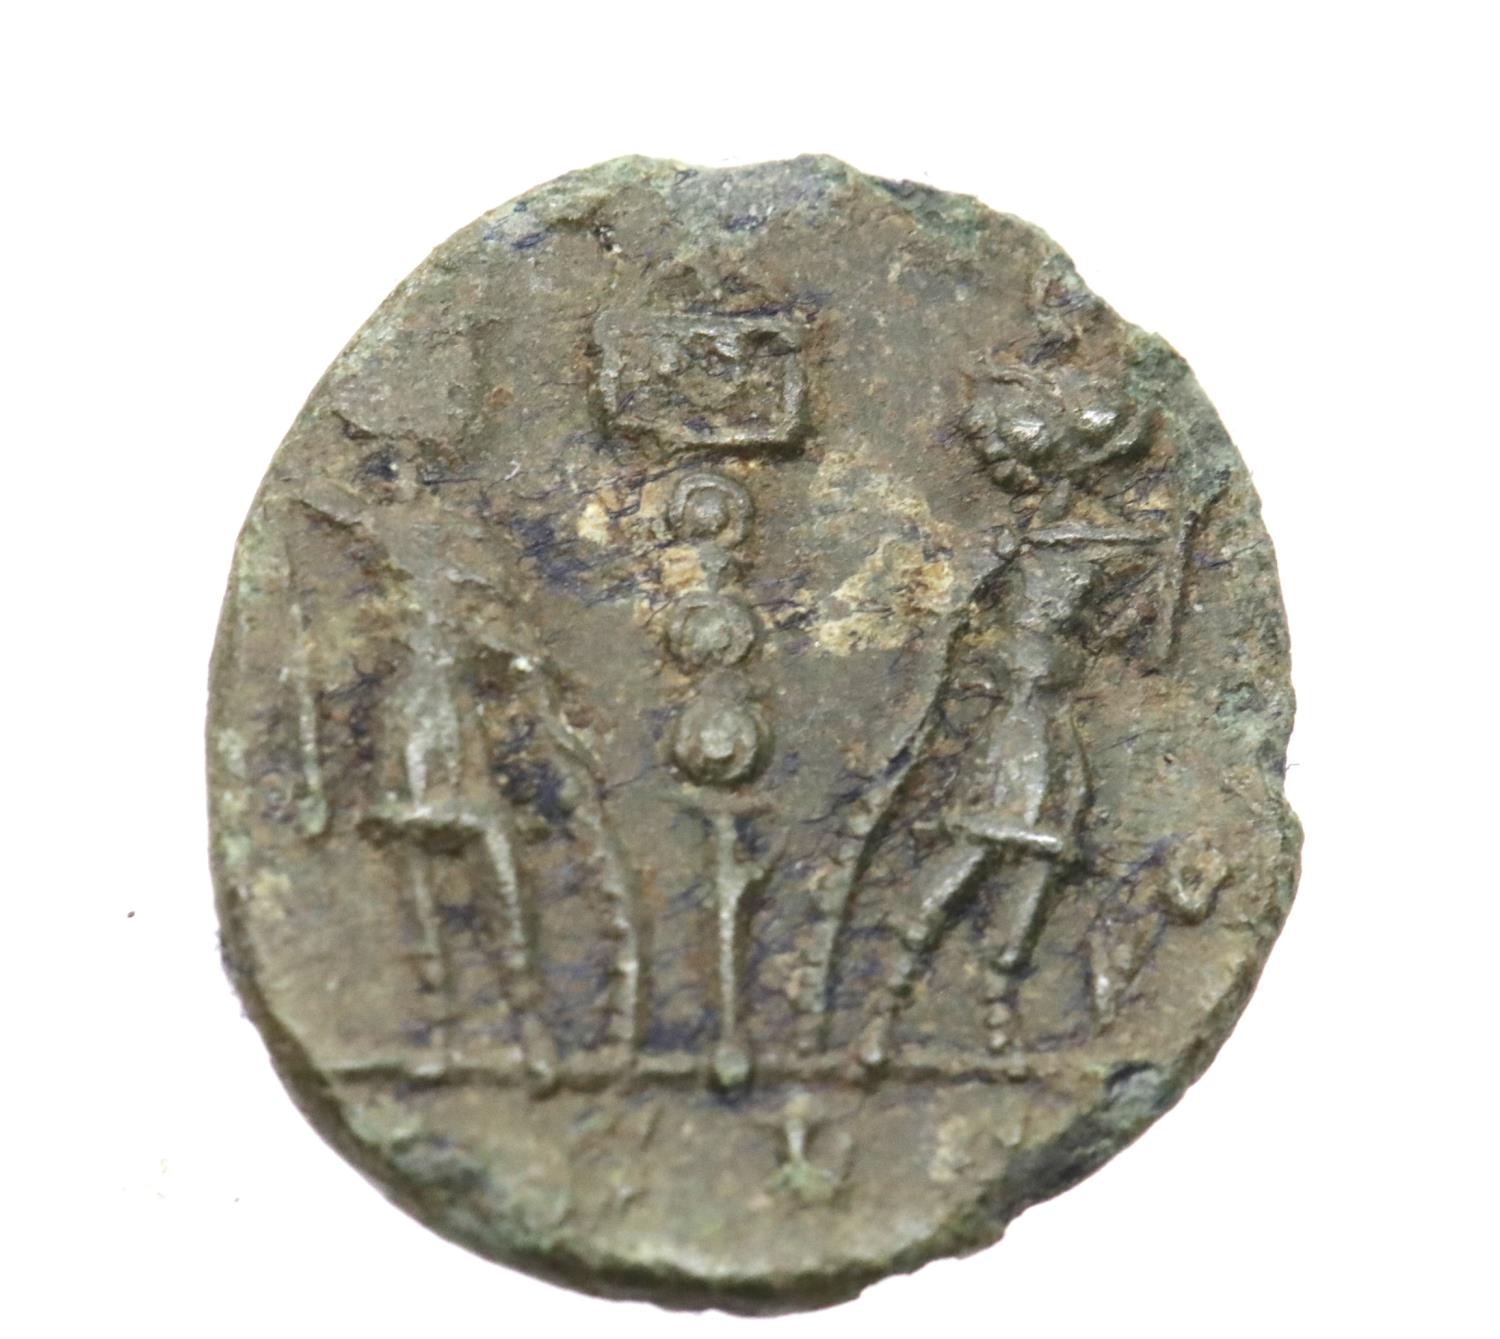 Roman Bronze AE4 Constantine dynasty with Centurions holding legionary standards. P&P Group 1 (£14+ - Image 2 of 2